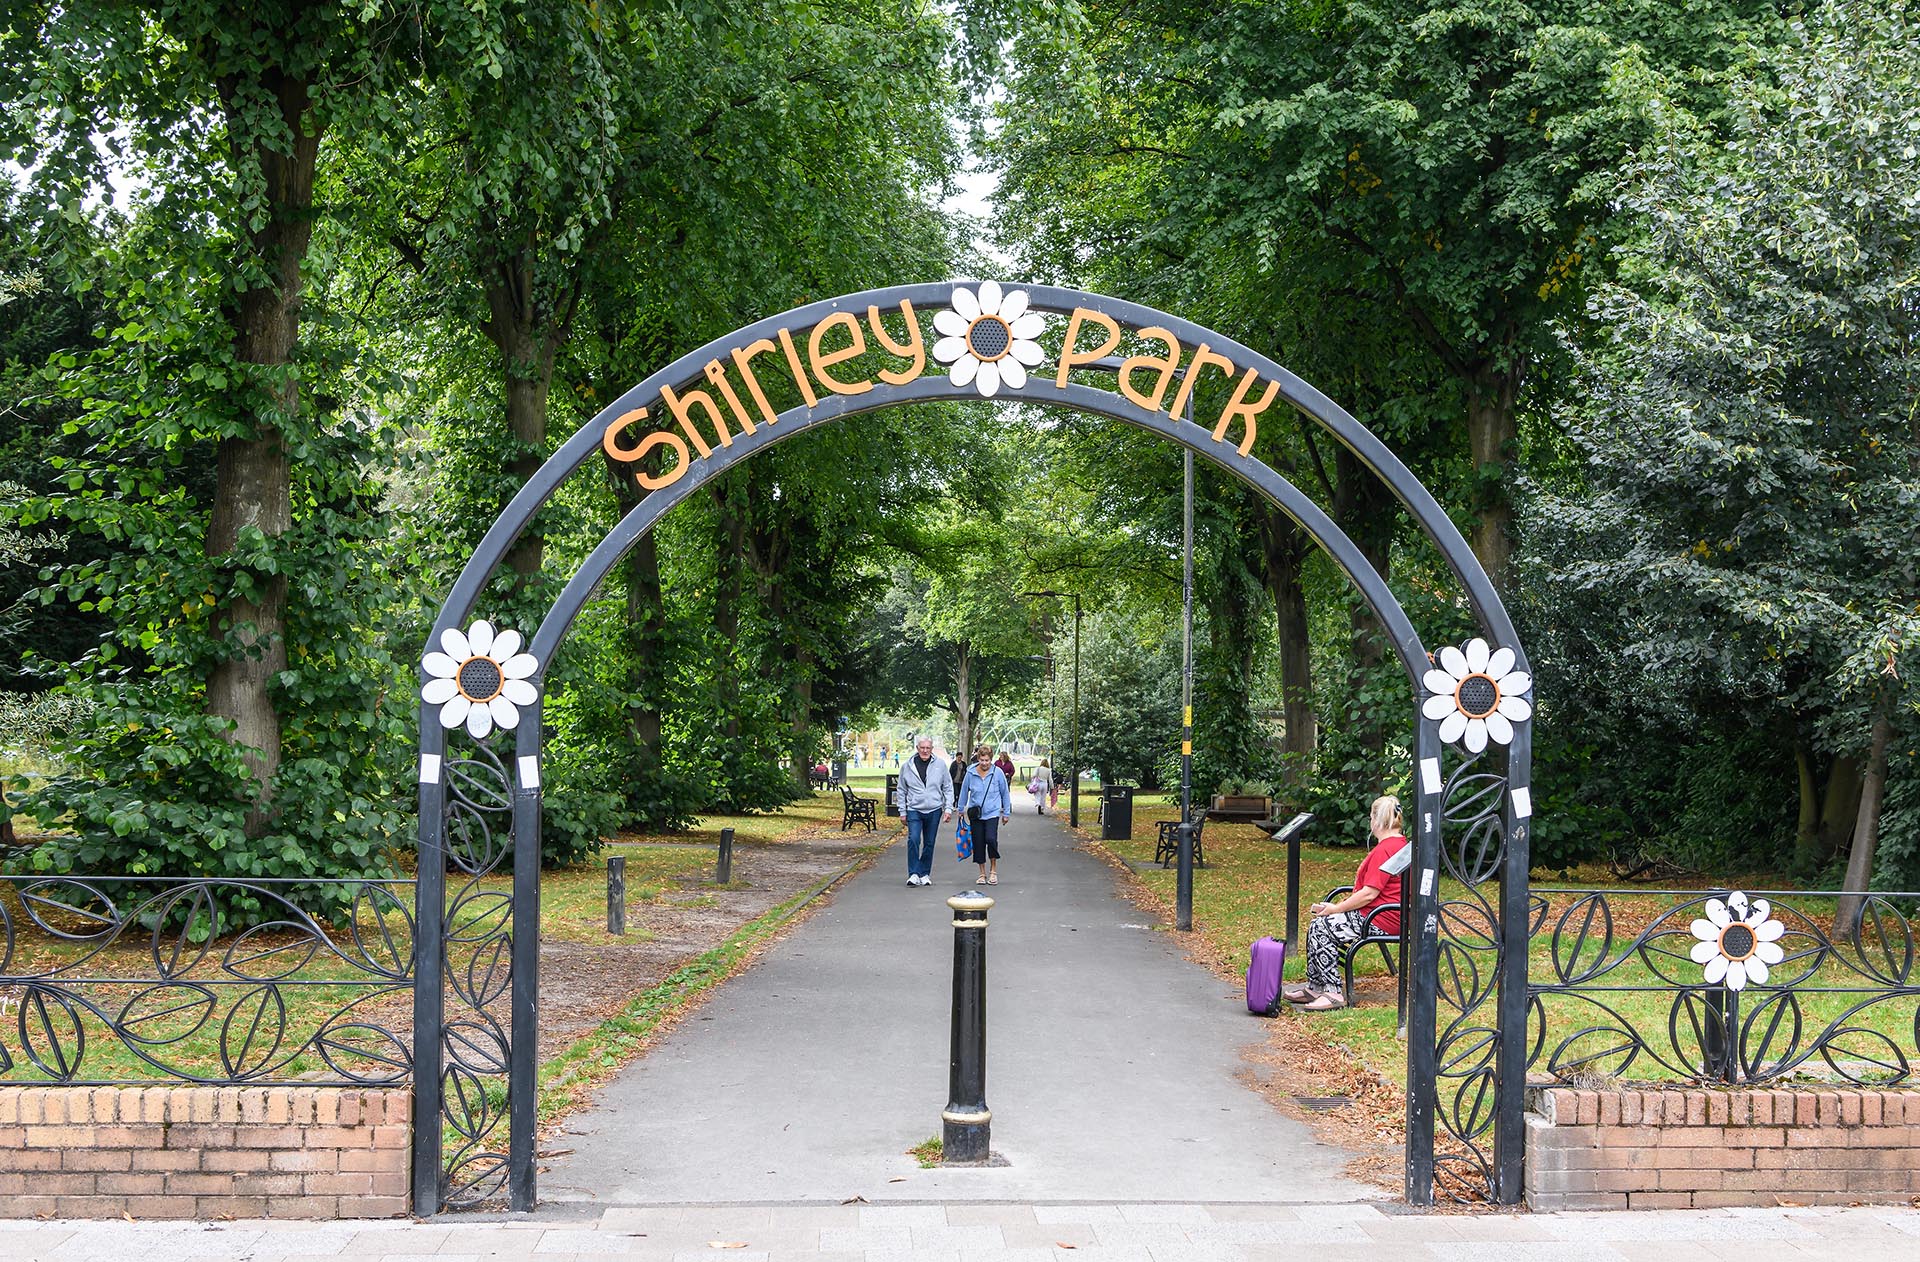 Entrance archway to Shirley Park decorated with flowers.